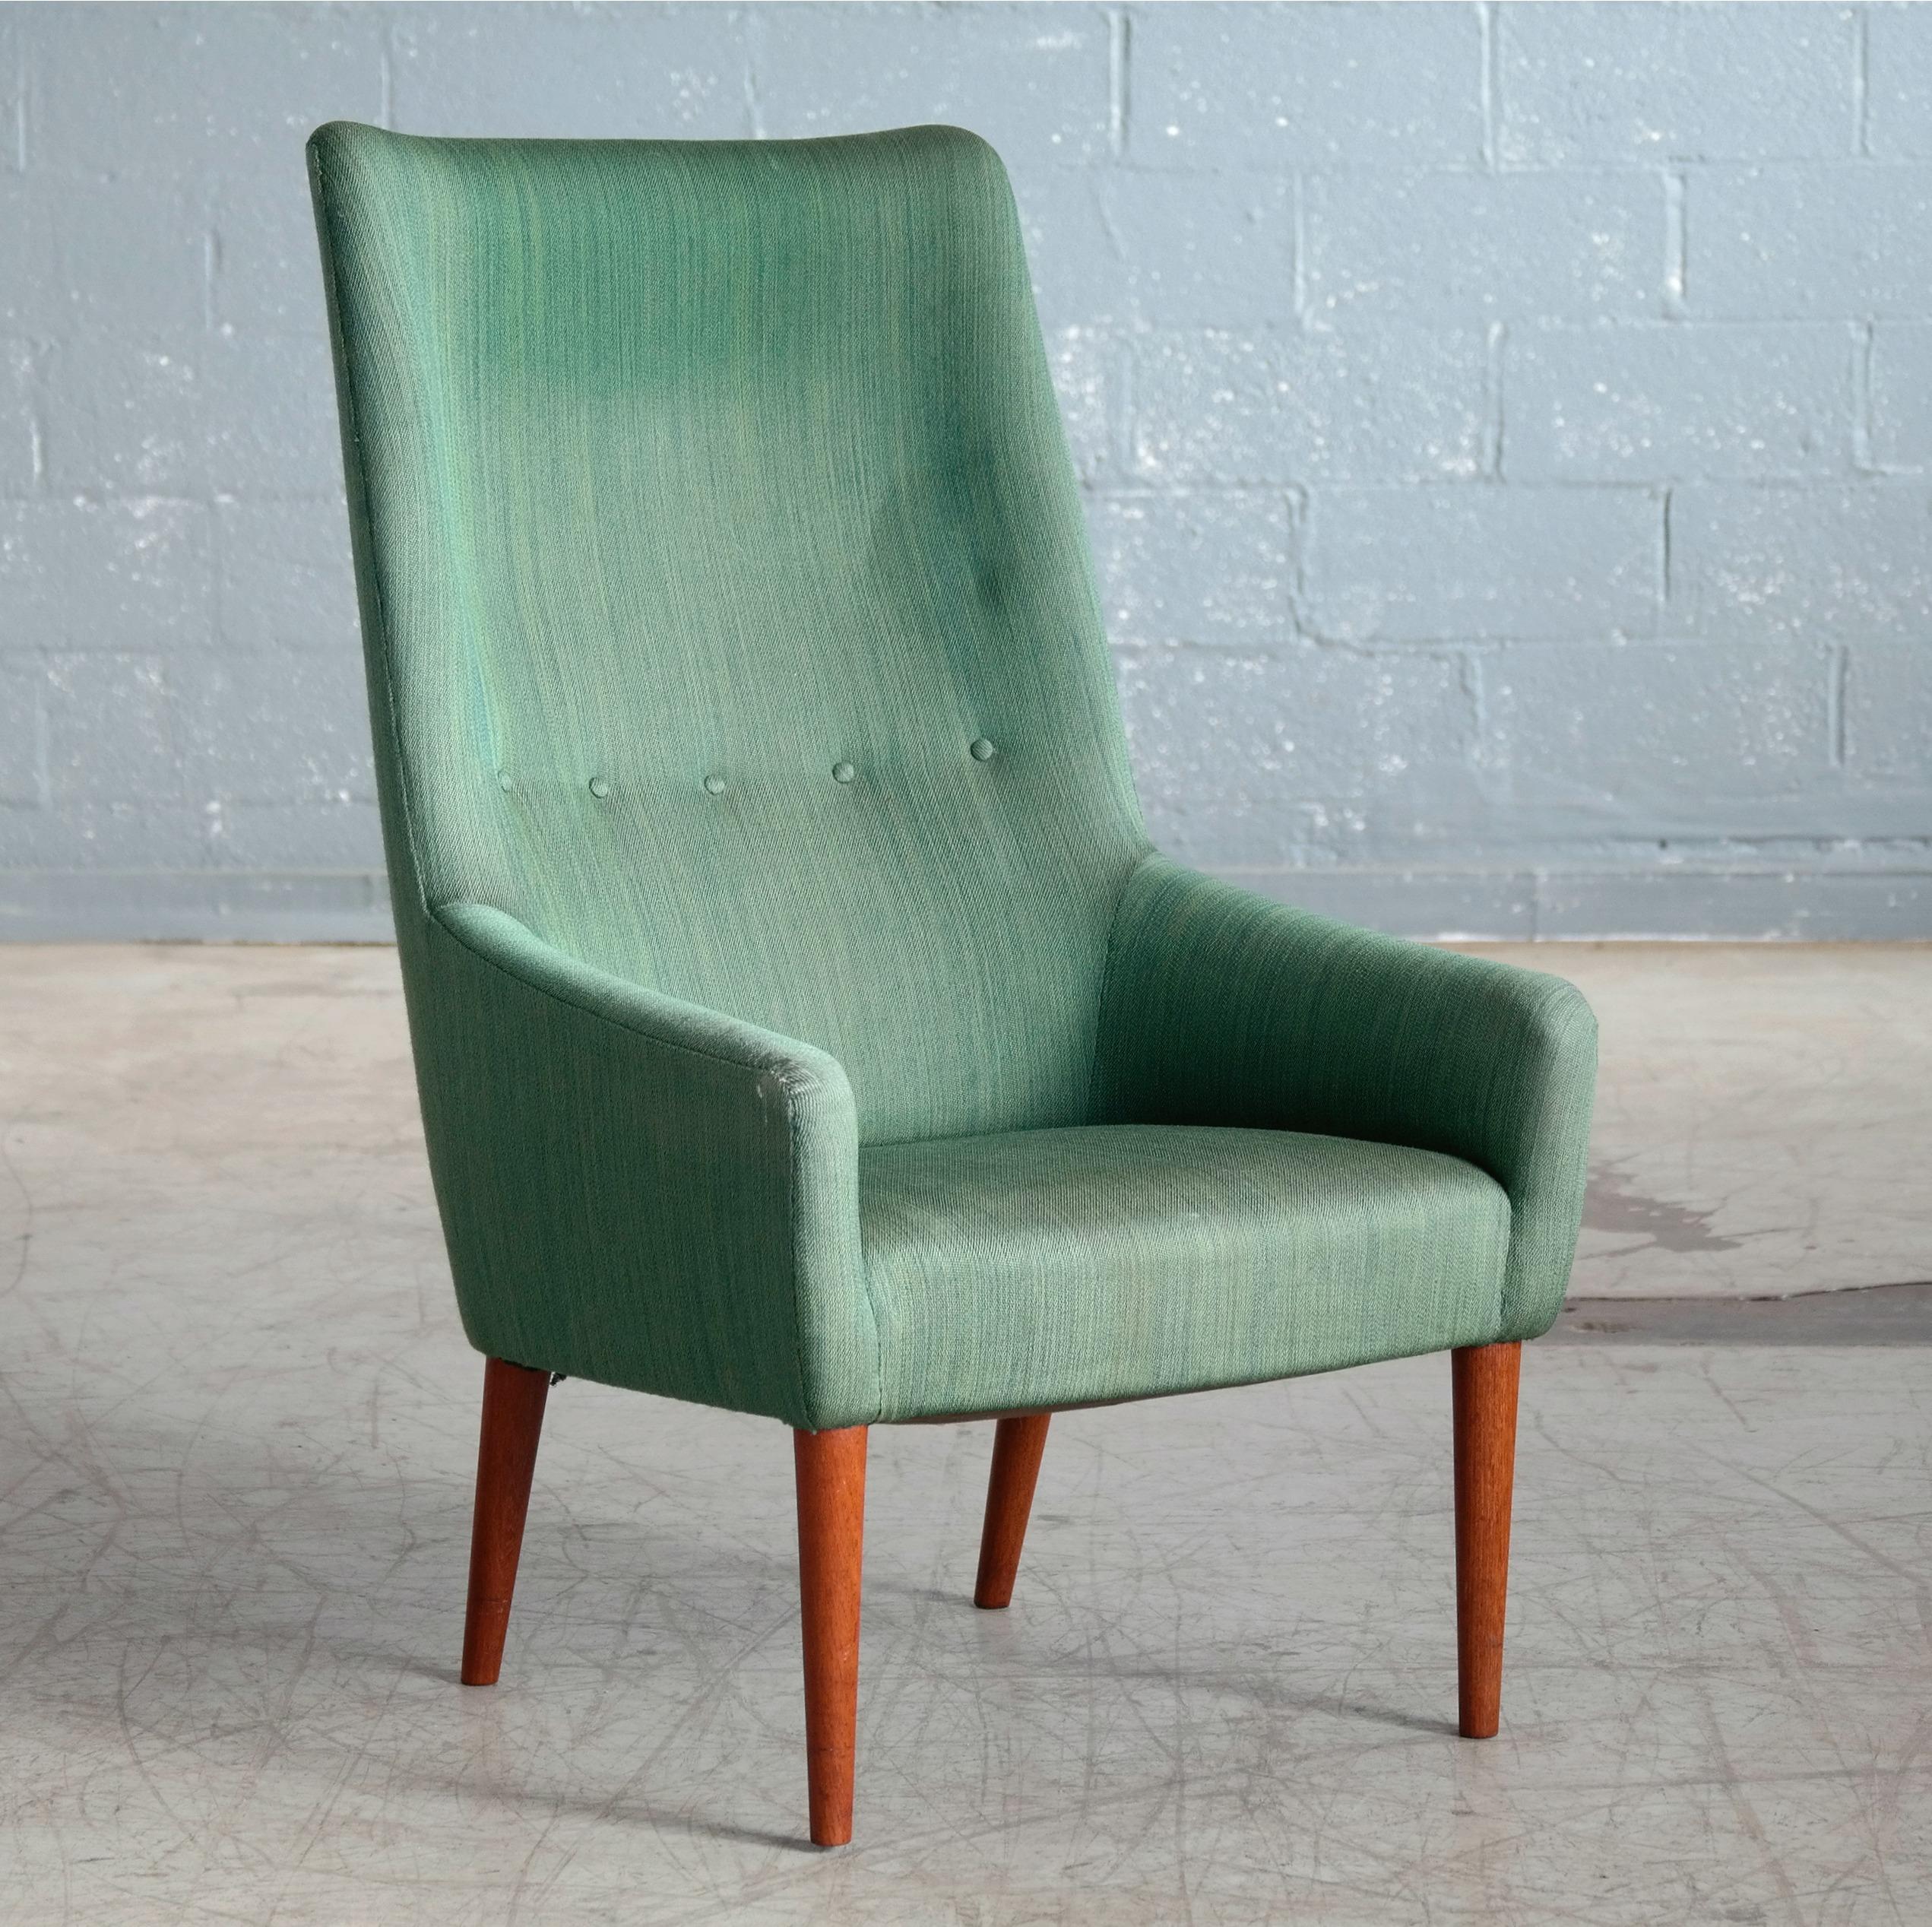 Mid-Century Modern Danish 1950s Easy Chair with Footstool by Master Cabinet Maker Jacob Kjaer